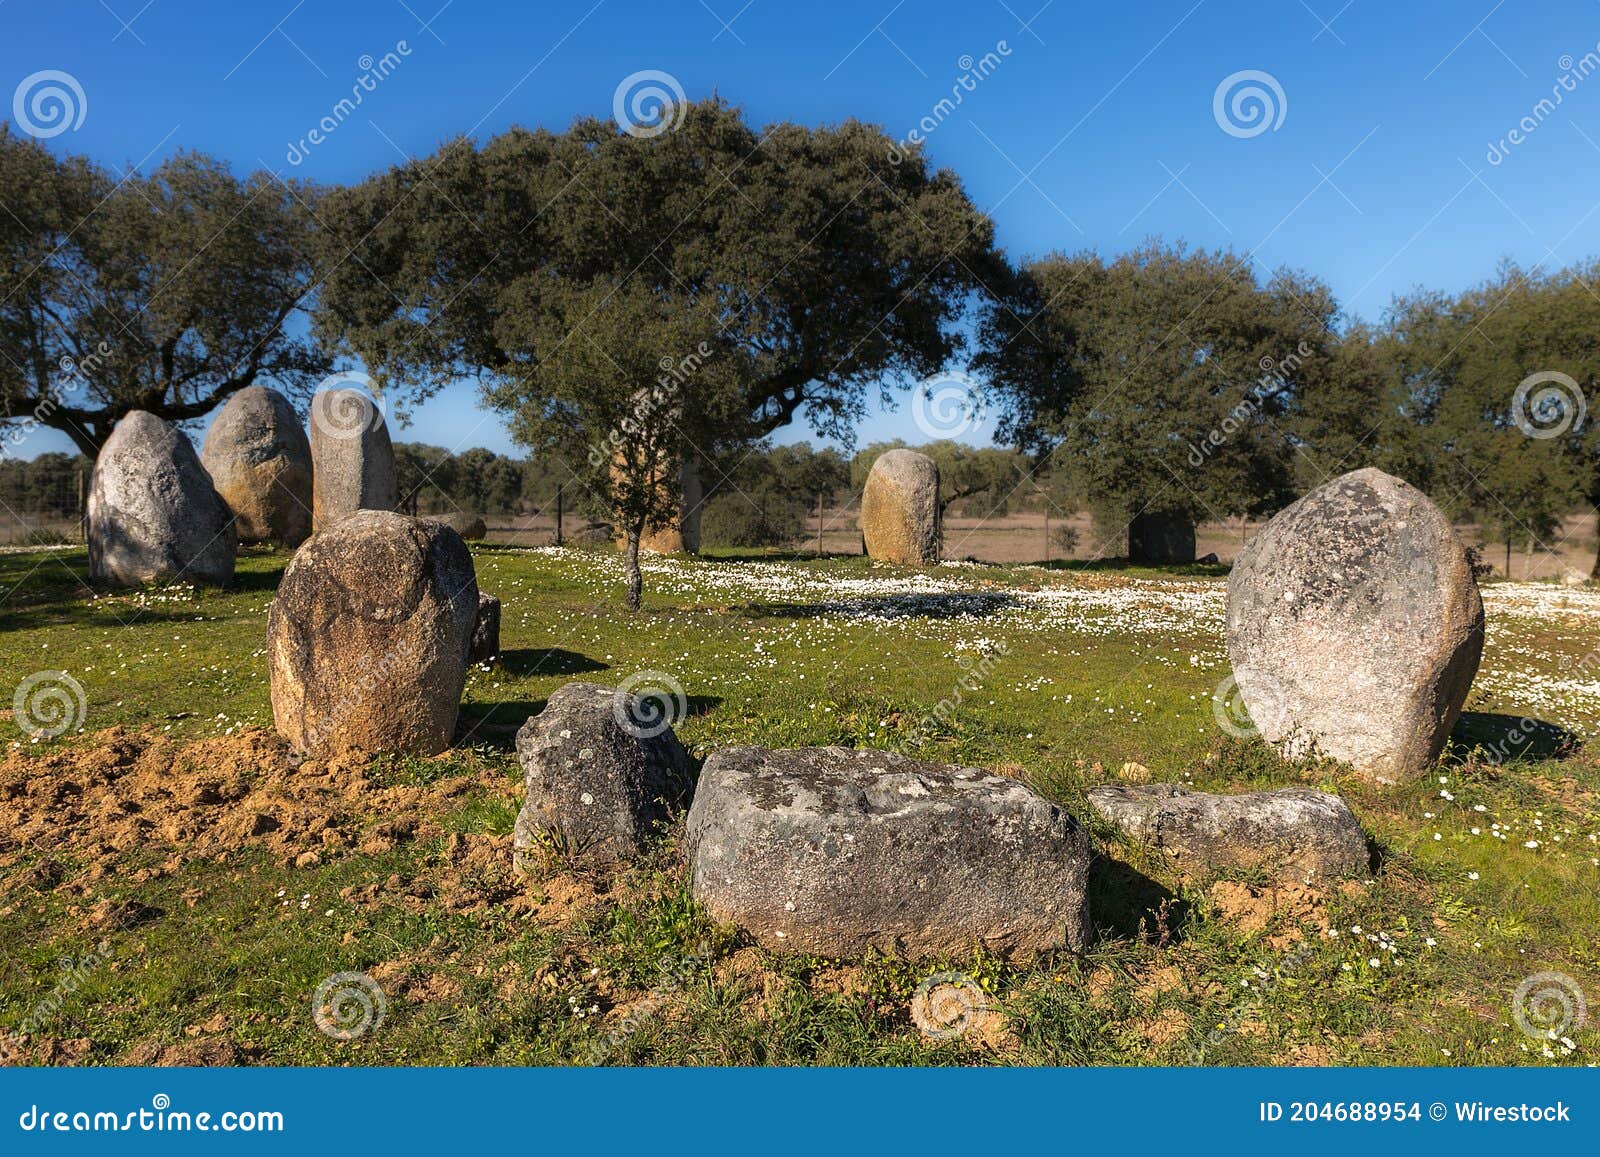 beautiful shot of the megalithic stone circle in vale maria do meio cromlech in evora, portugal